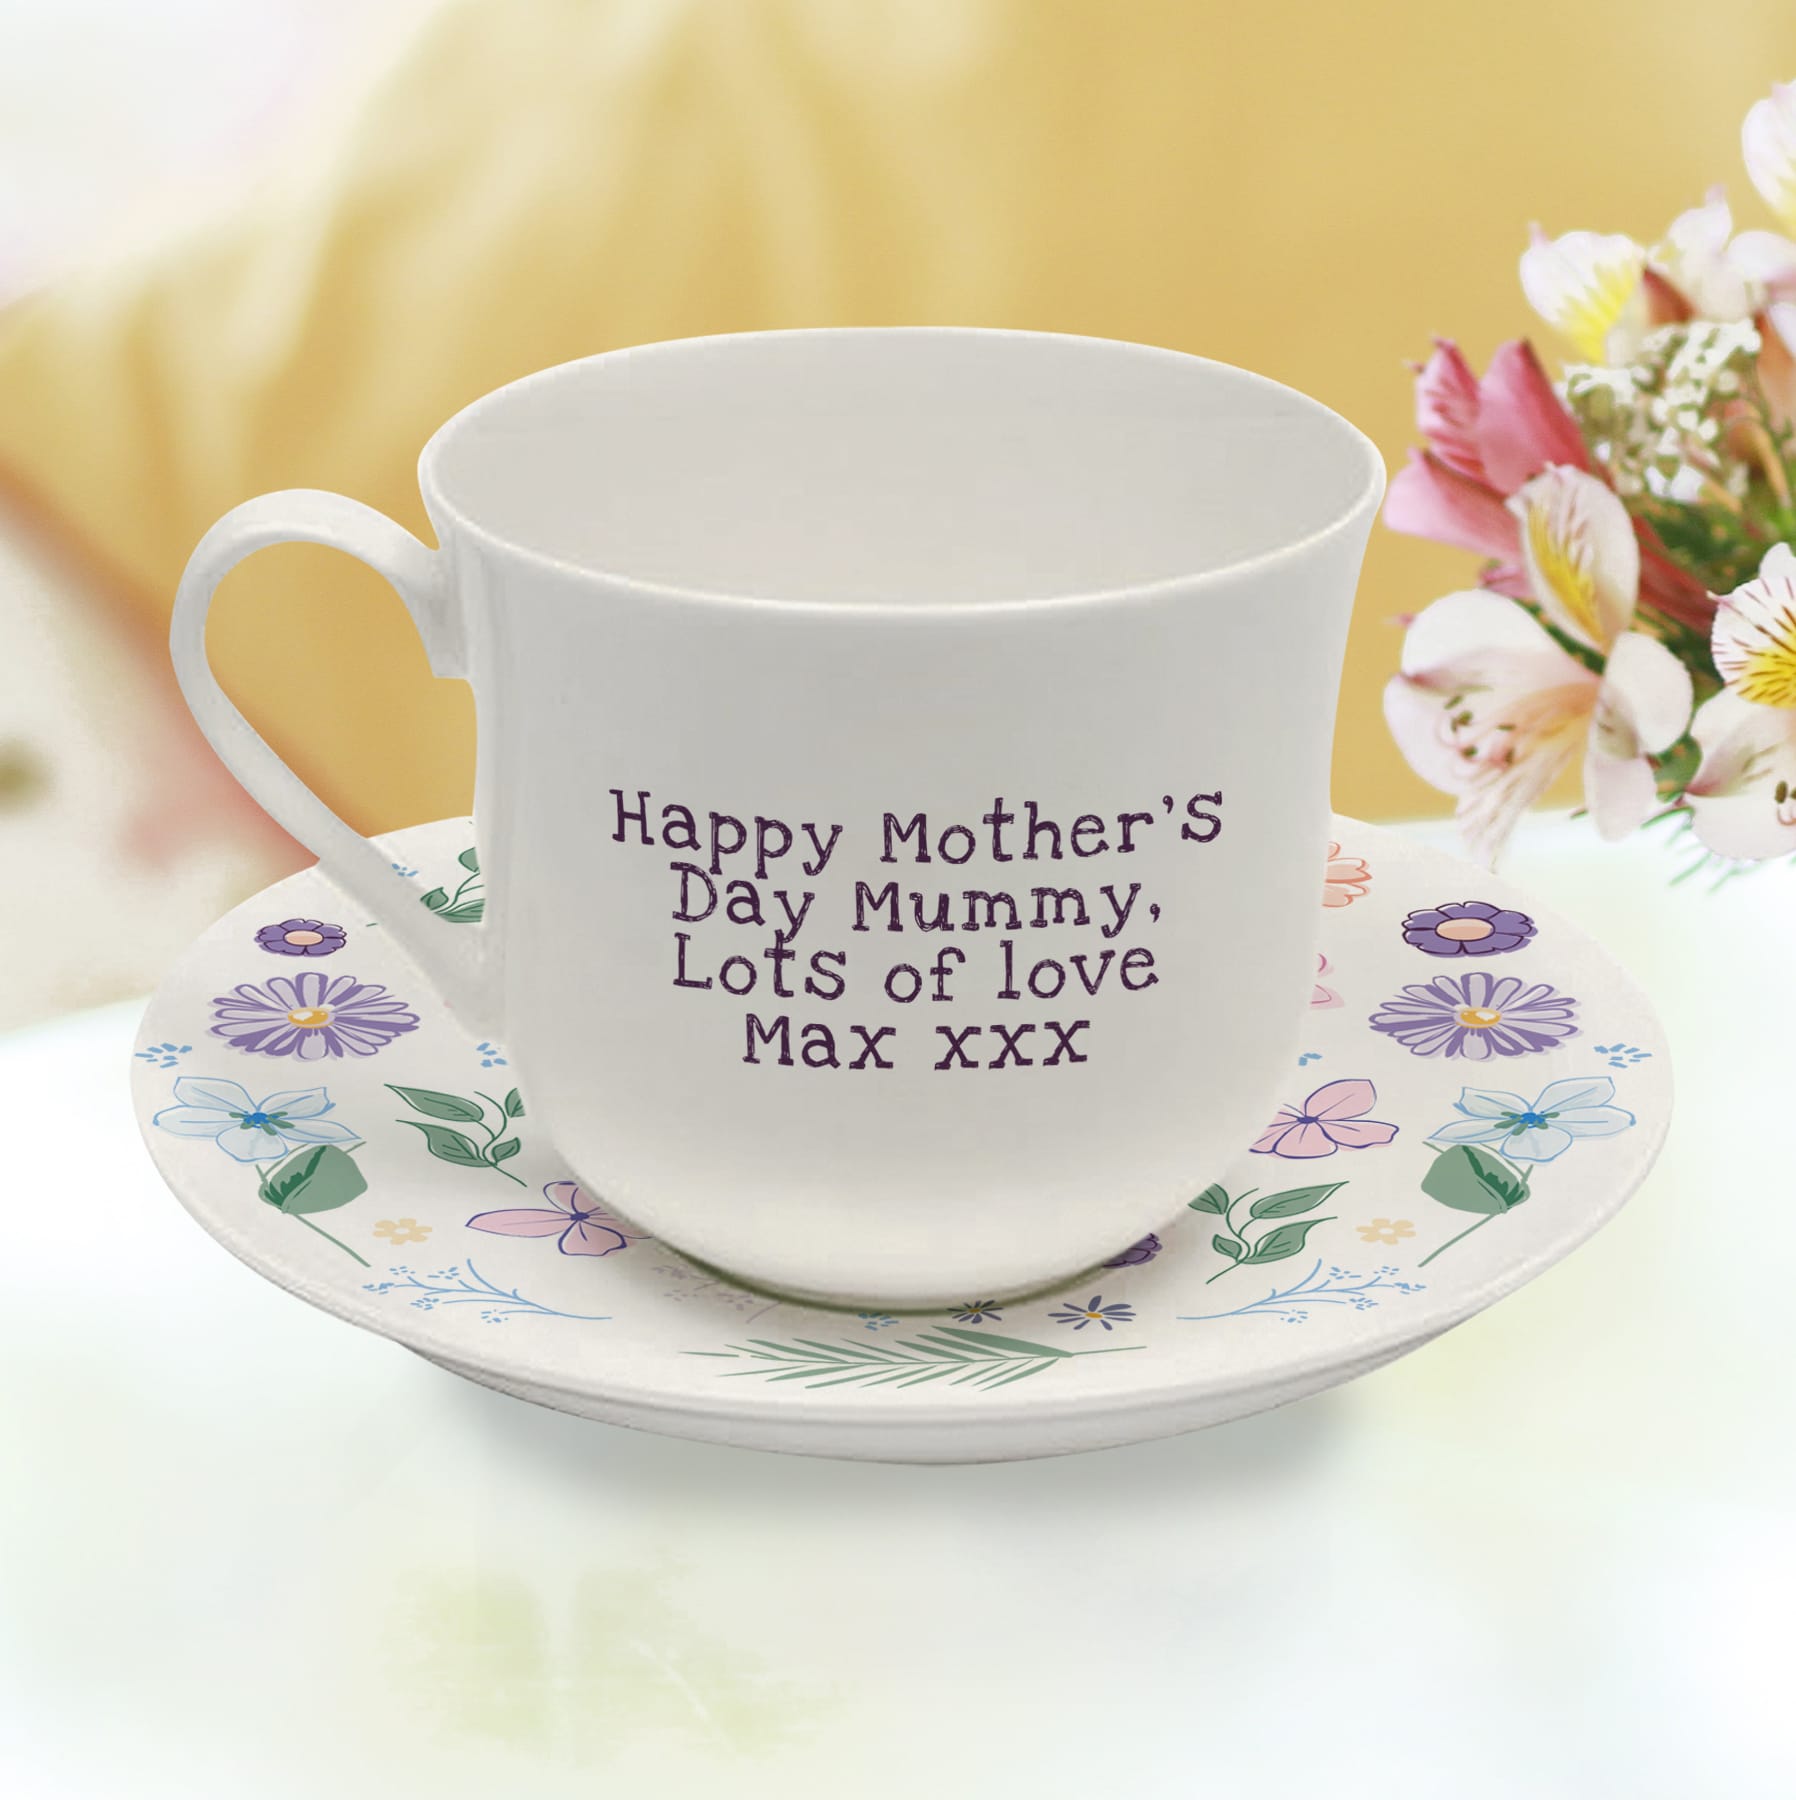 Personalised Peppa Pig Mummy Pig Floral Cup & Saucer